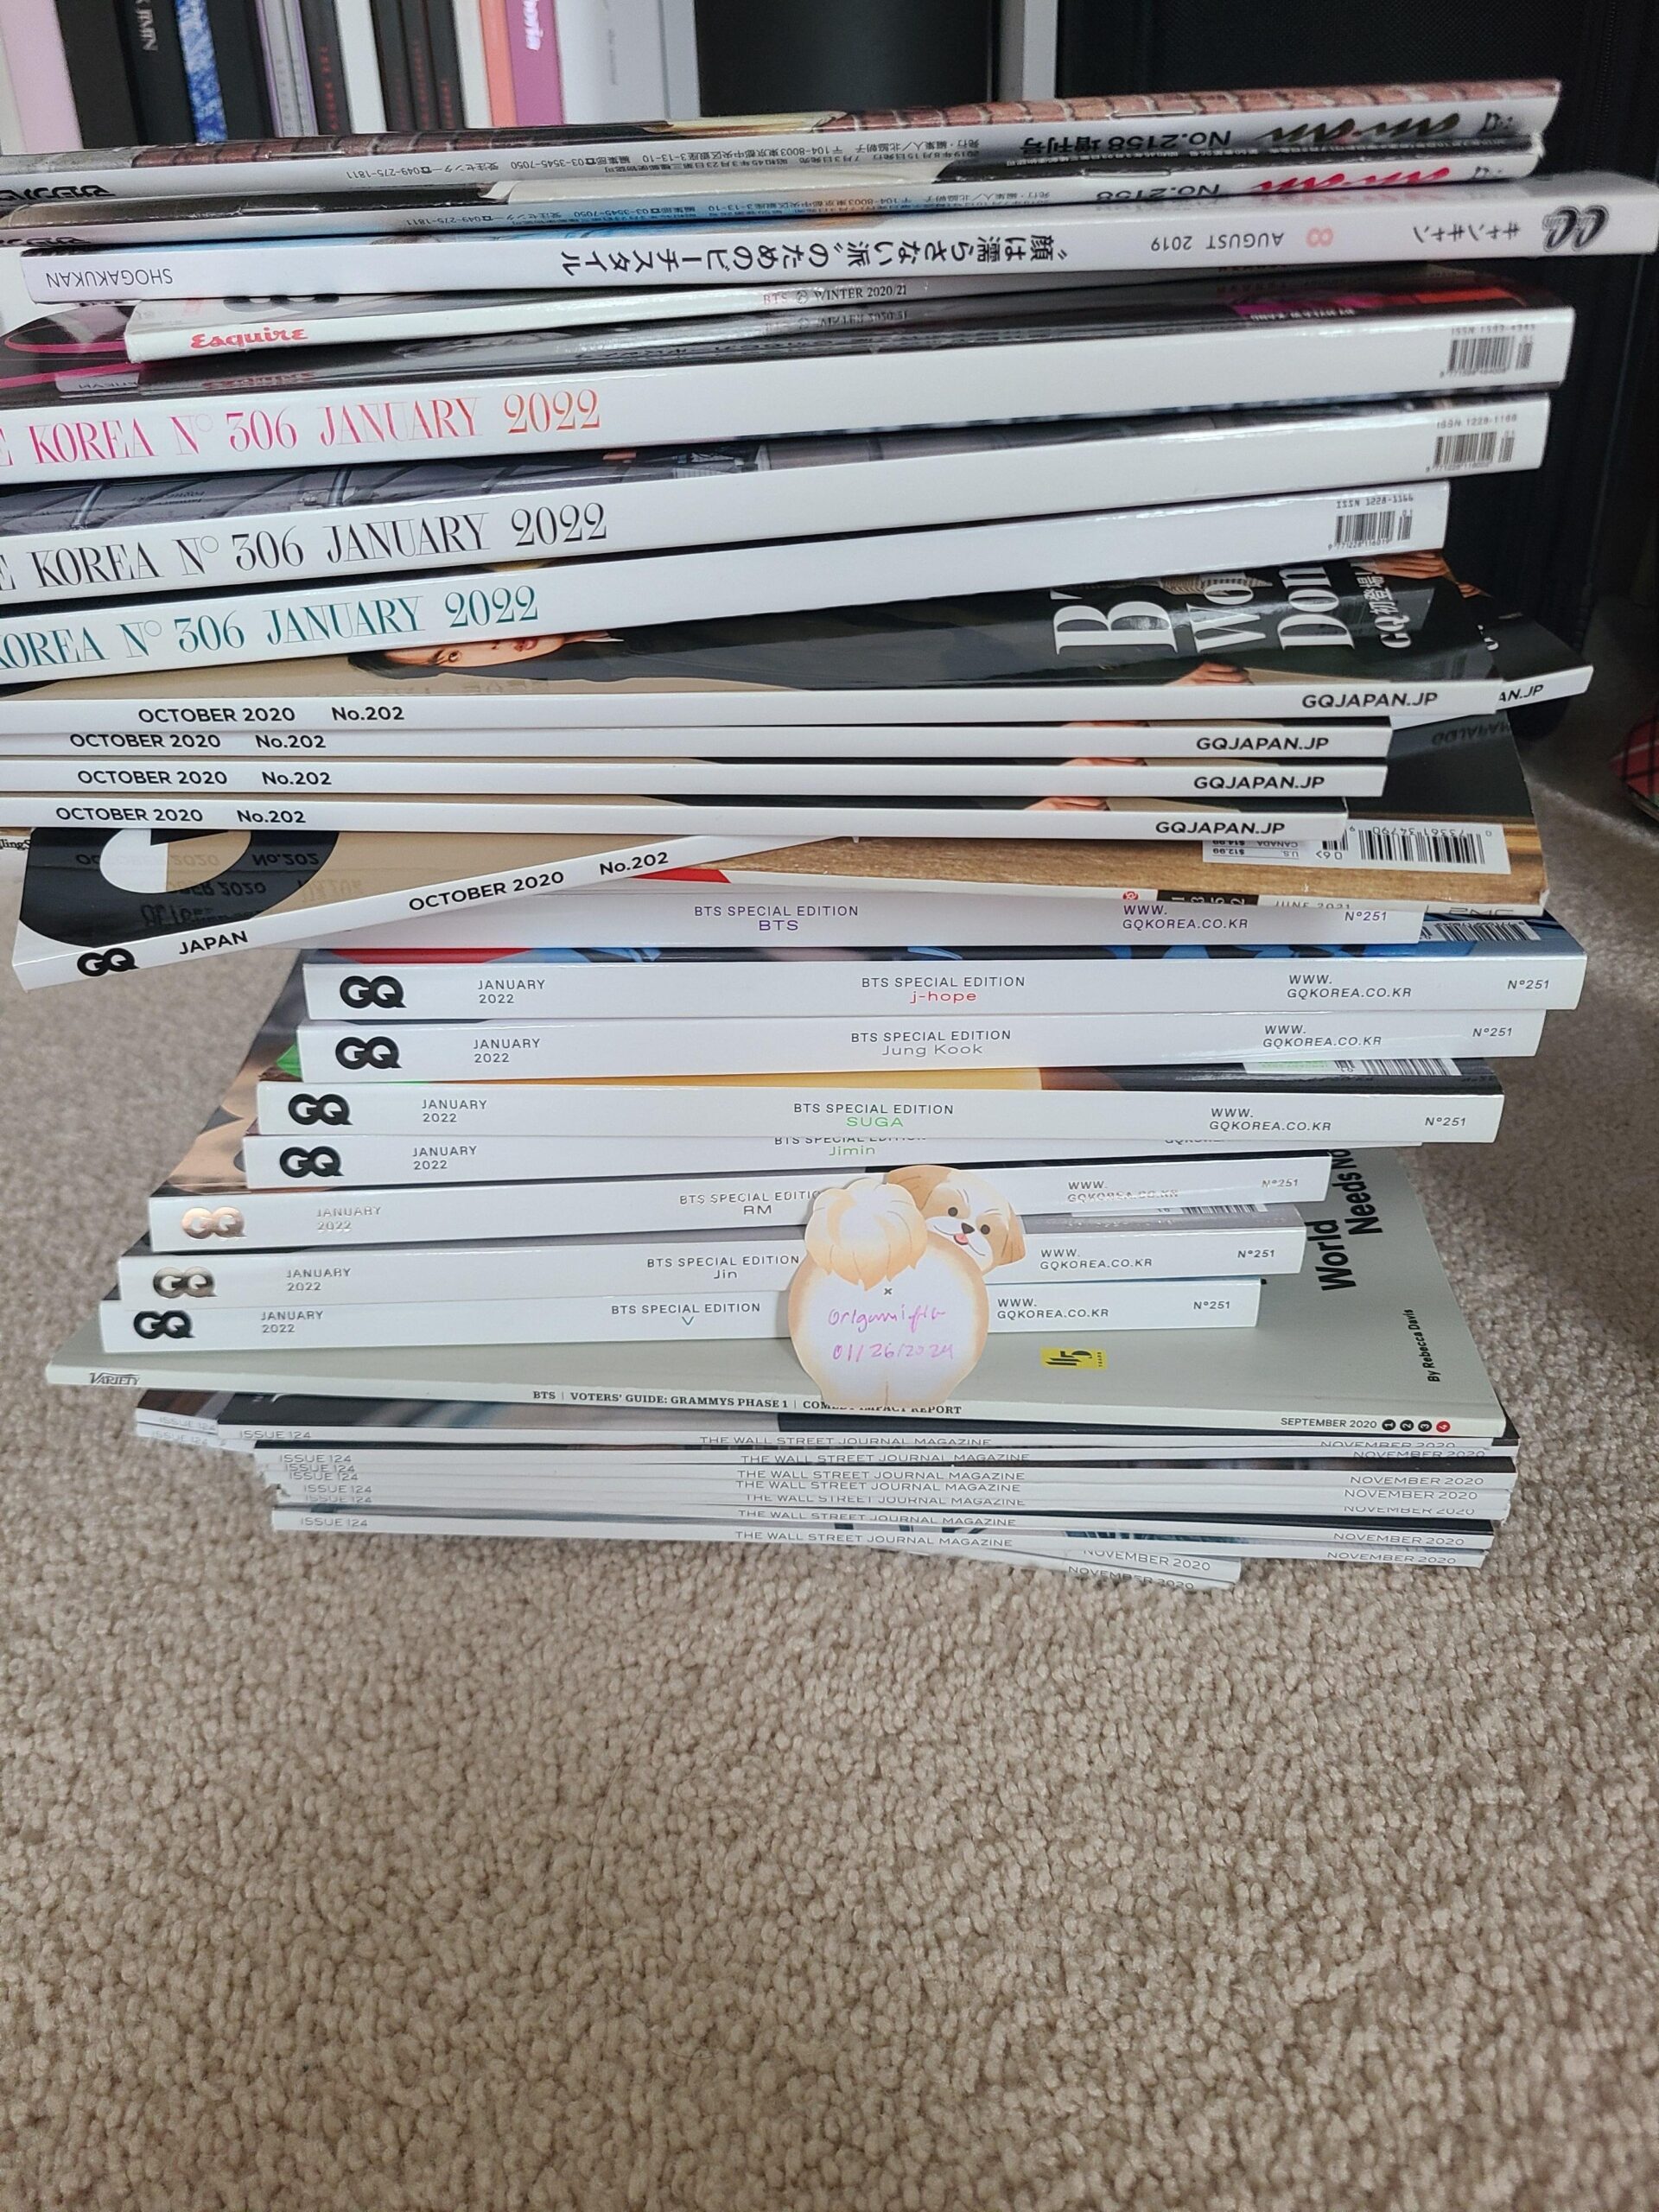 WTS - Lots of BTS Magazine. (USA SHIPPING)